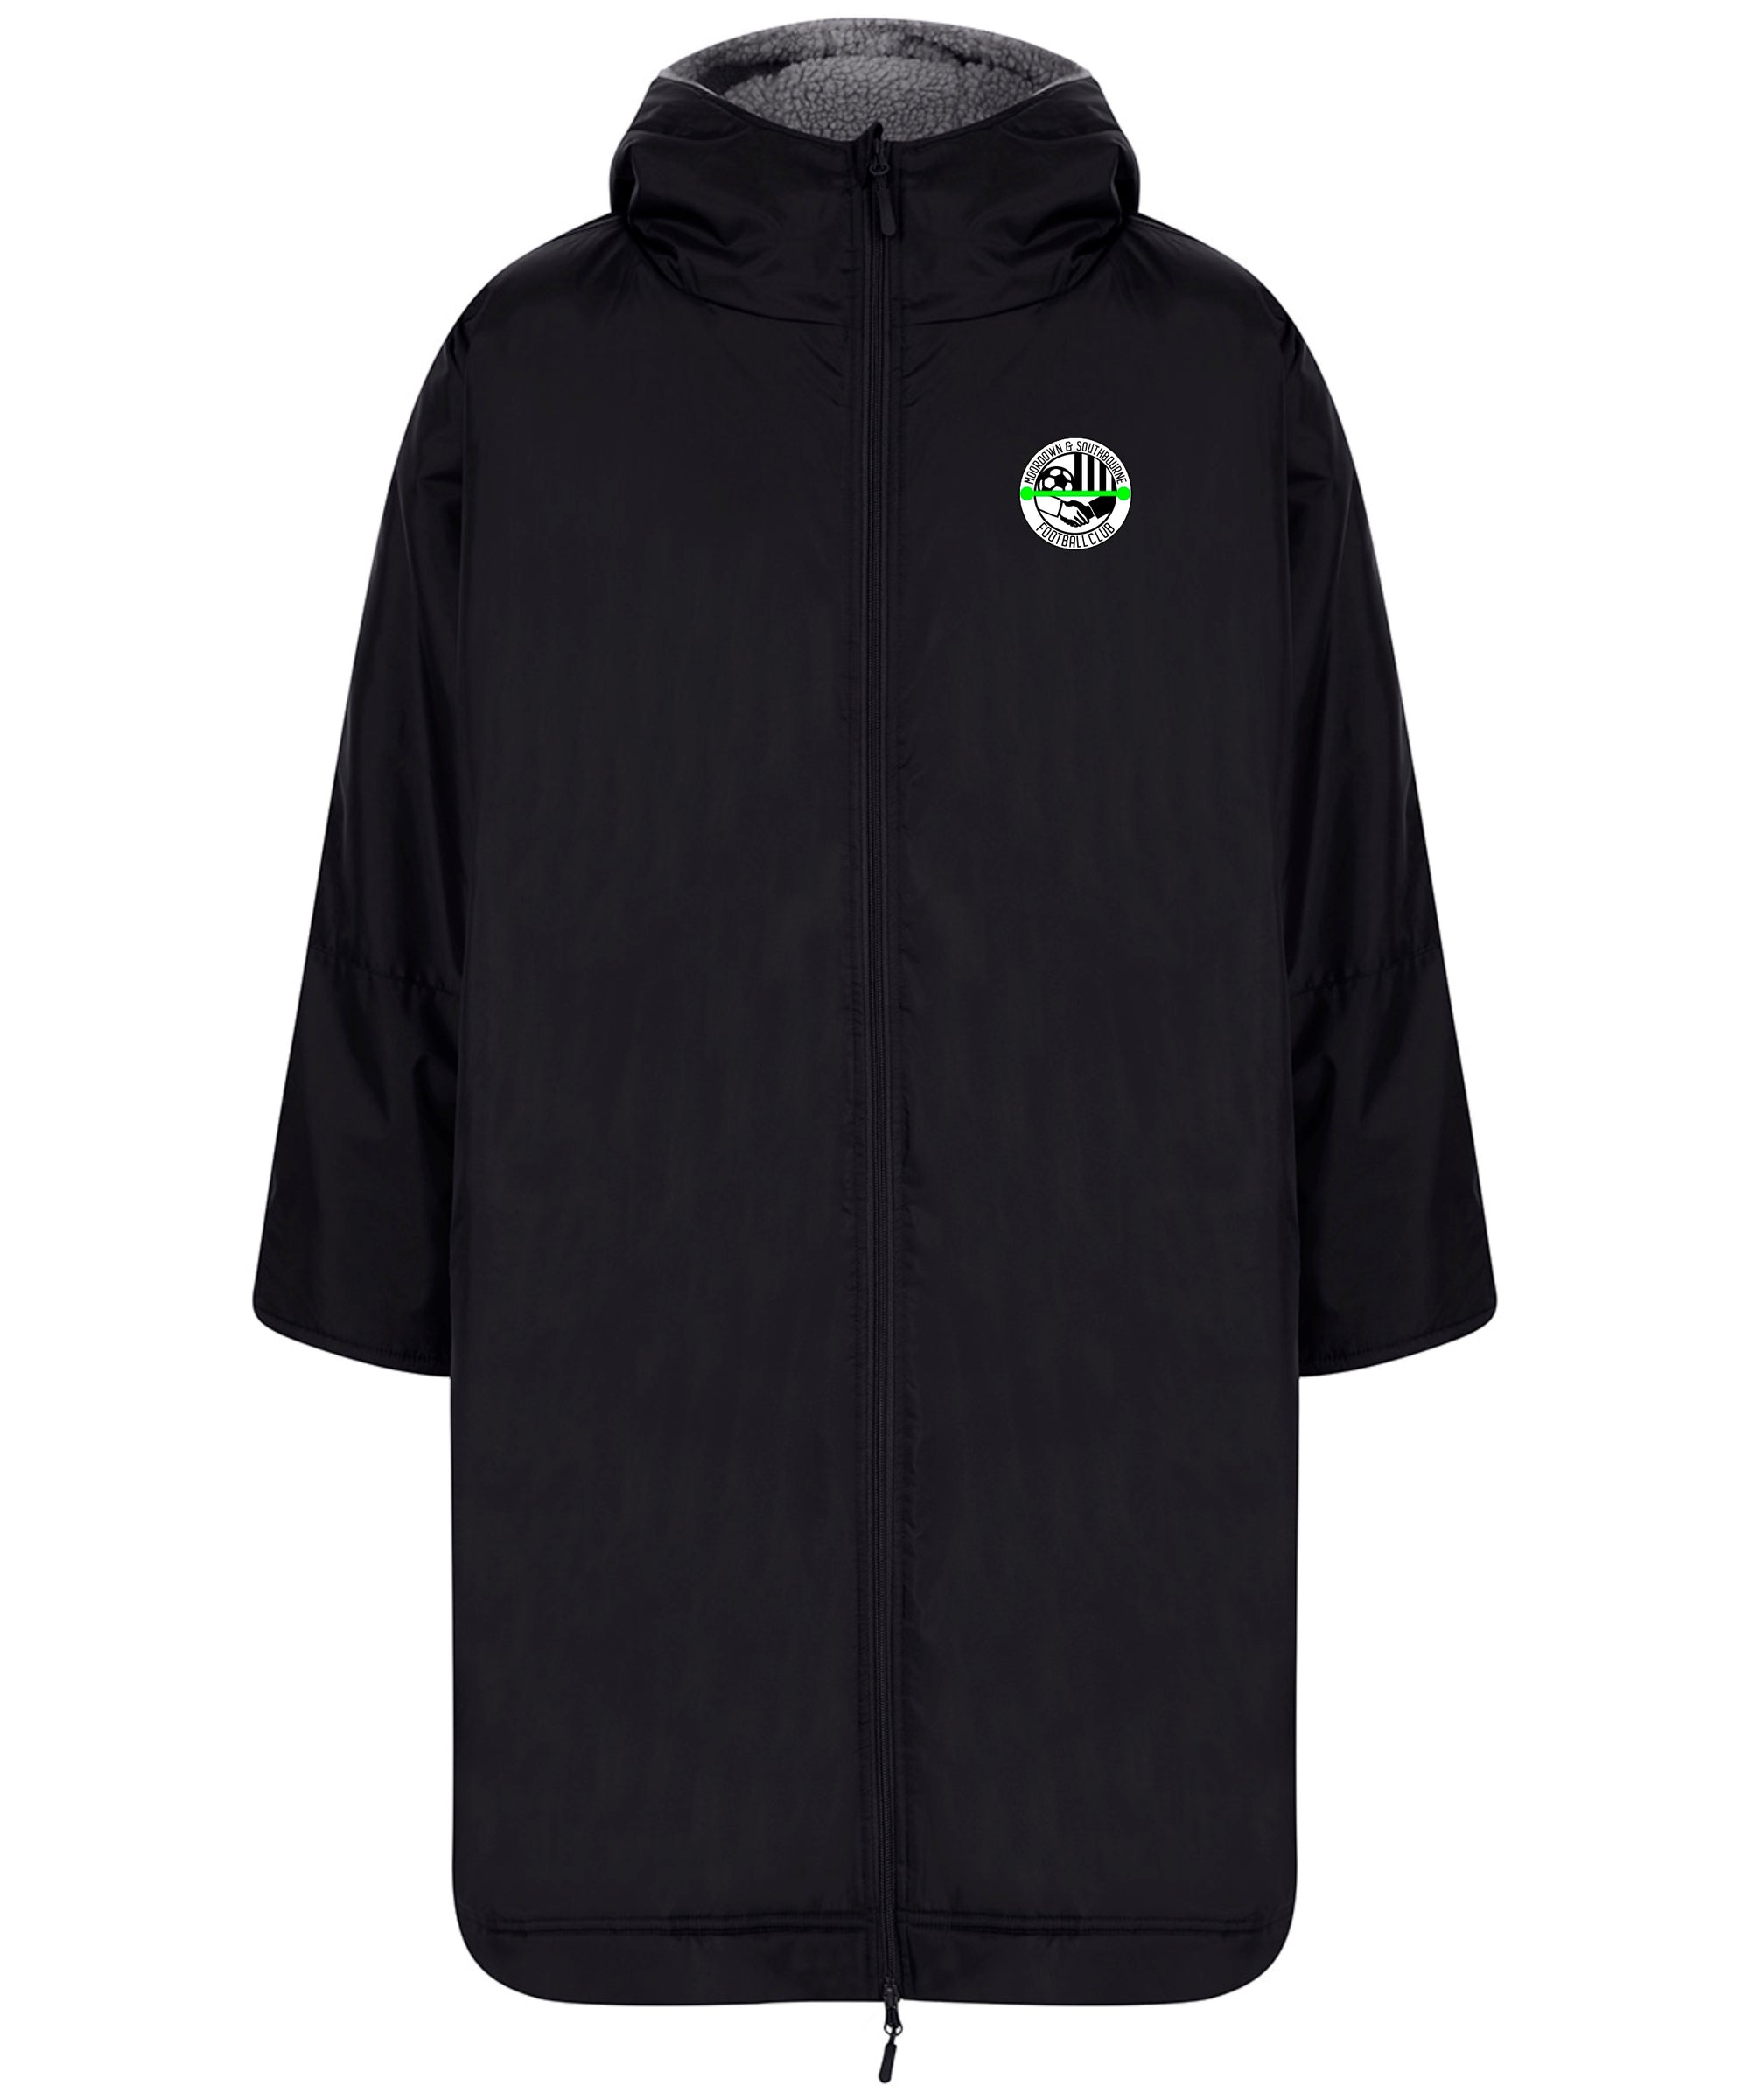 Moordown Supporters - All Weather Dry Robe